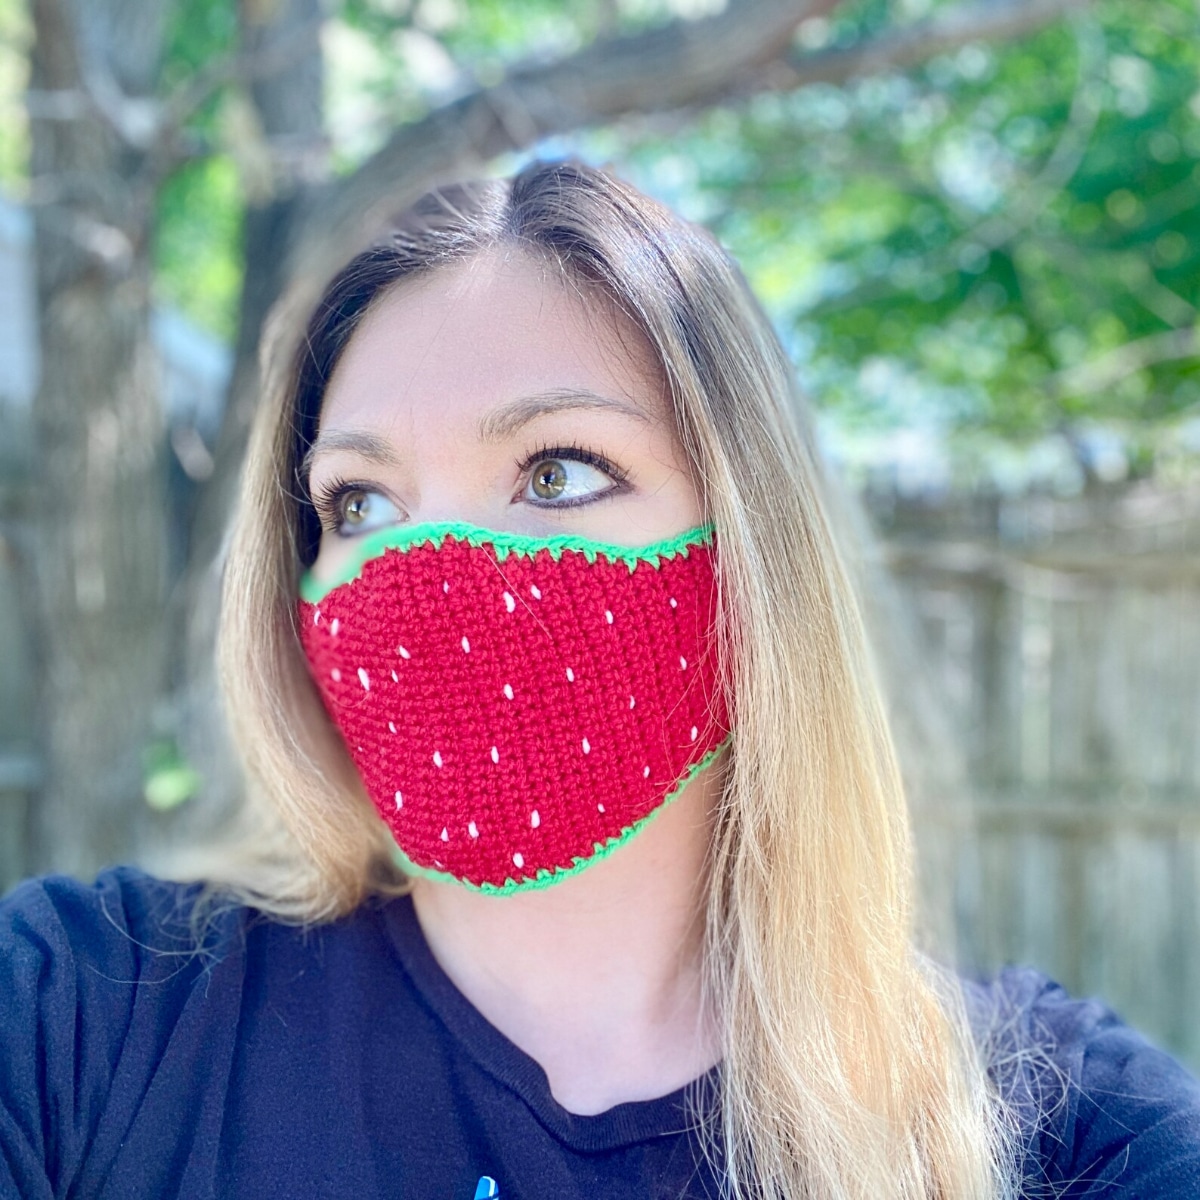 Blond woman wearing a strawberry design facemask with a green trim and red center with small white dots all over it.